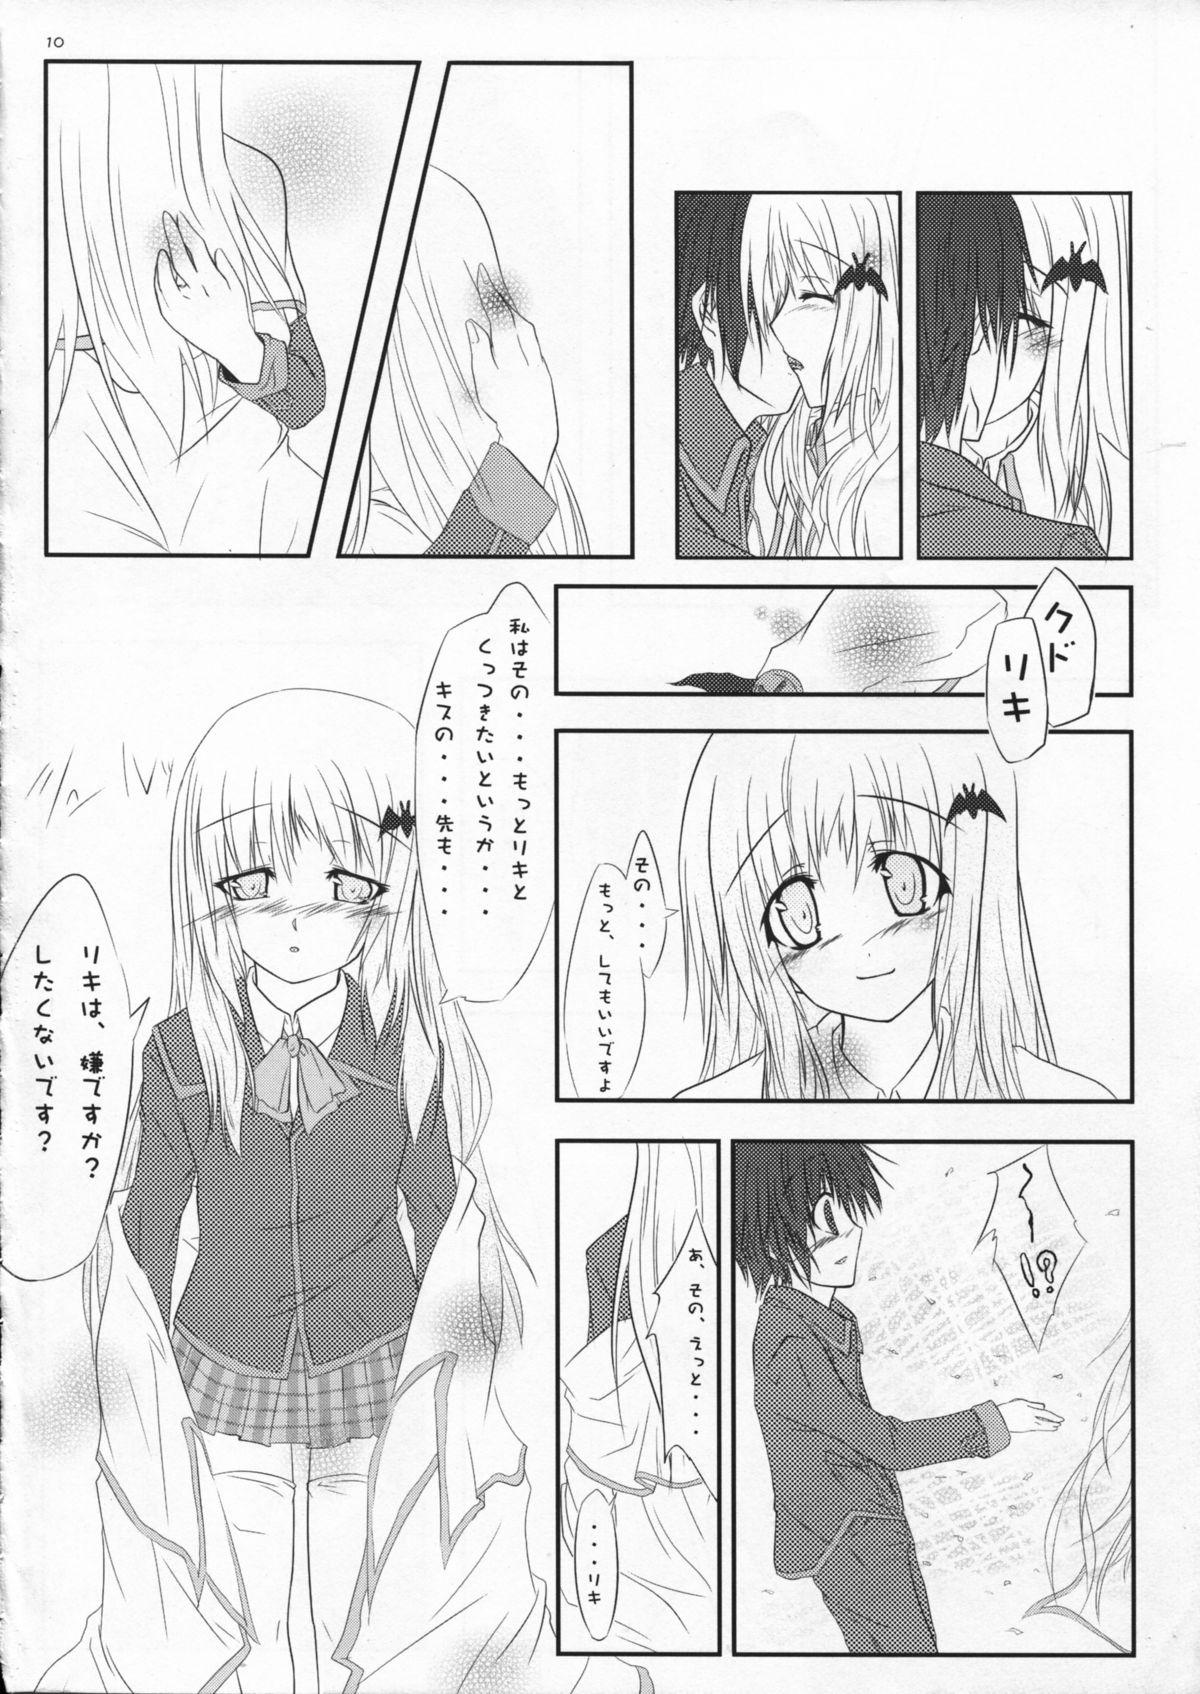 Fishnets Wanko no Jikan - Little busters Gay Dudes - Page 10